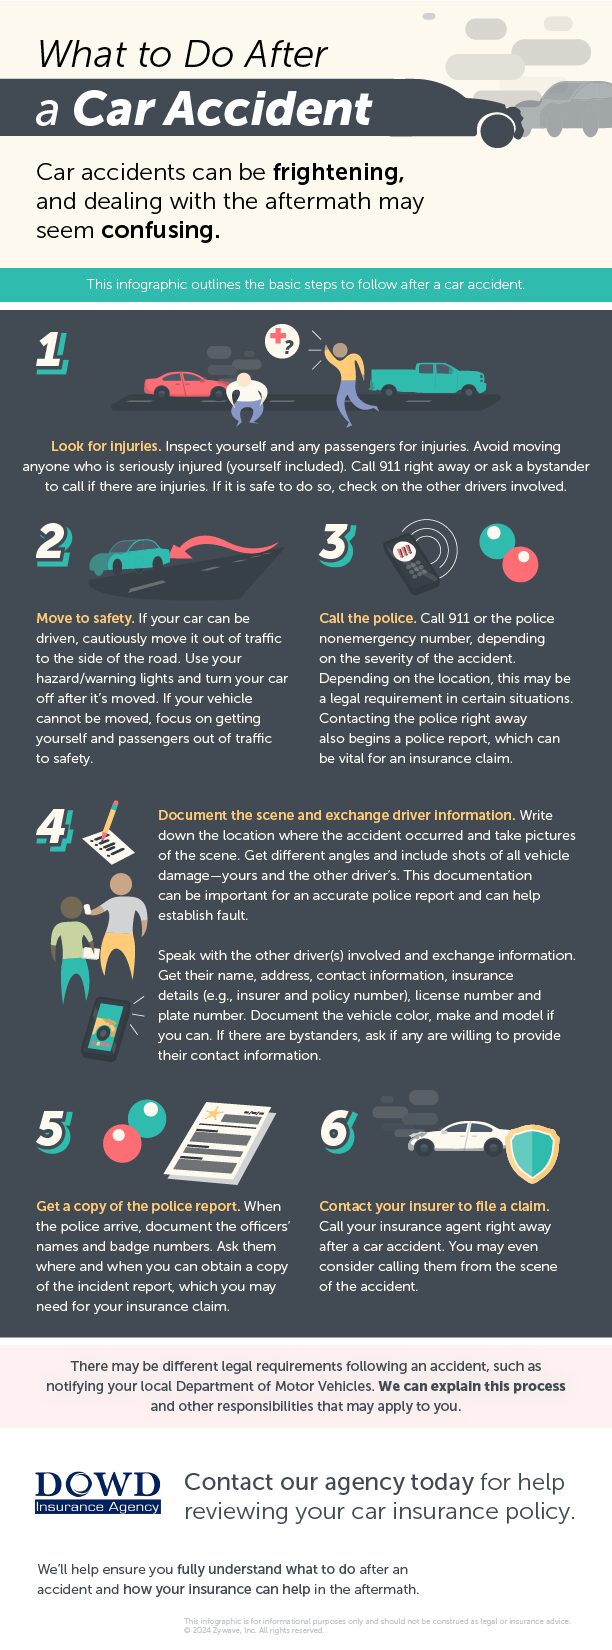 This infographic outlines the basic steps to follow after a car accident.